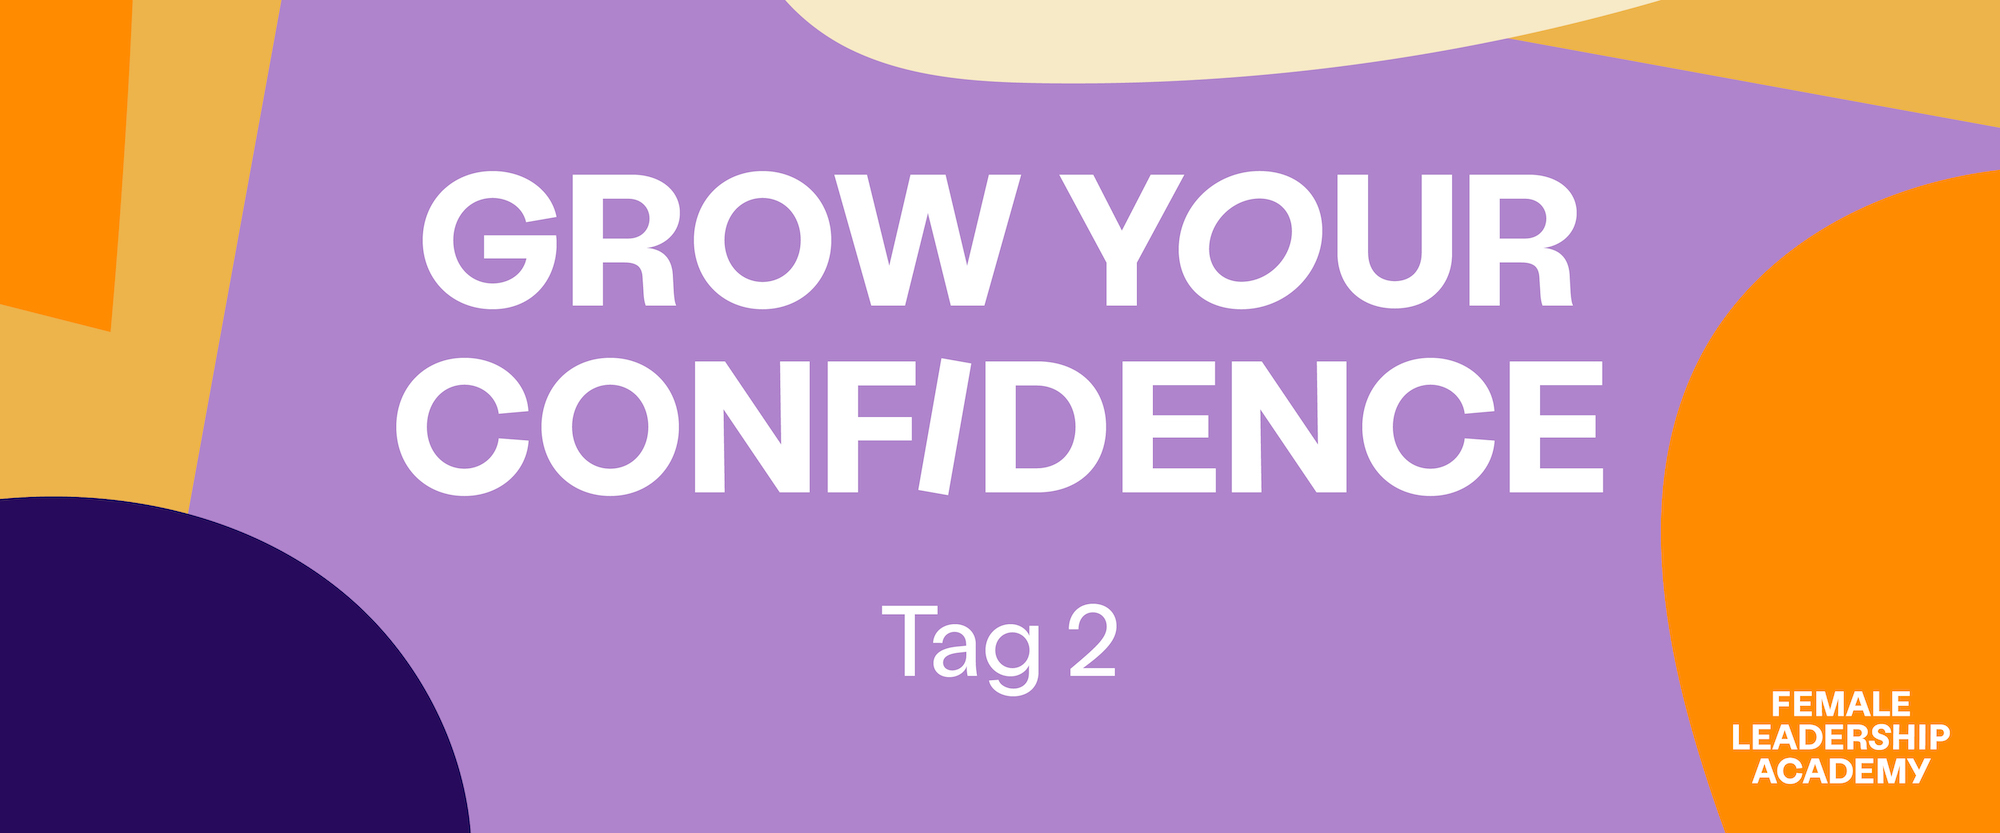 Grow your Confidence - Tag 2